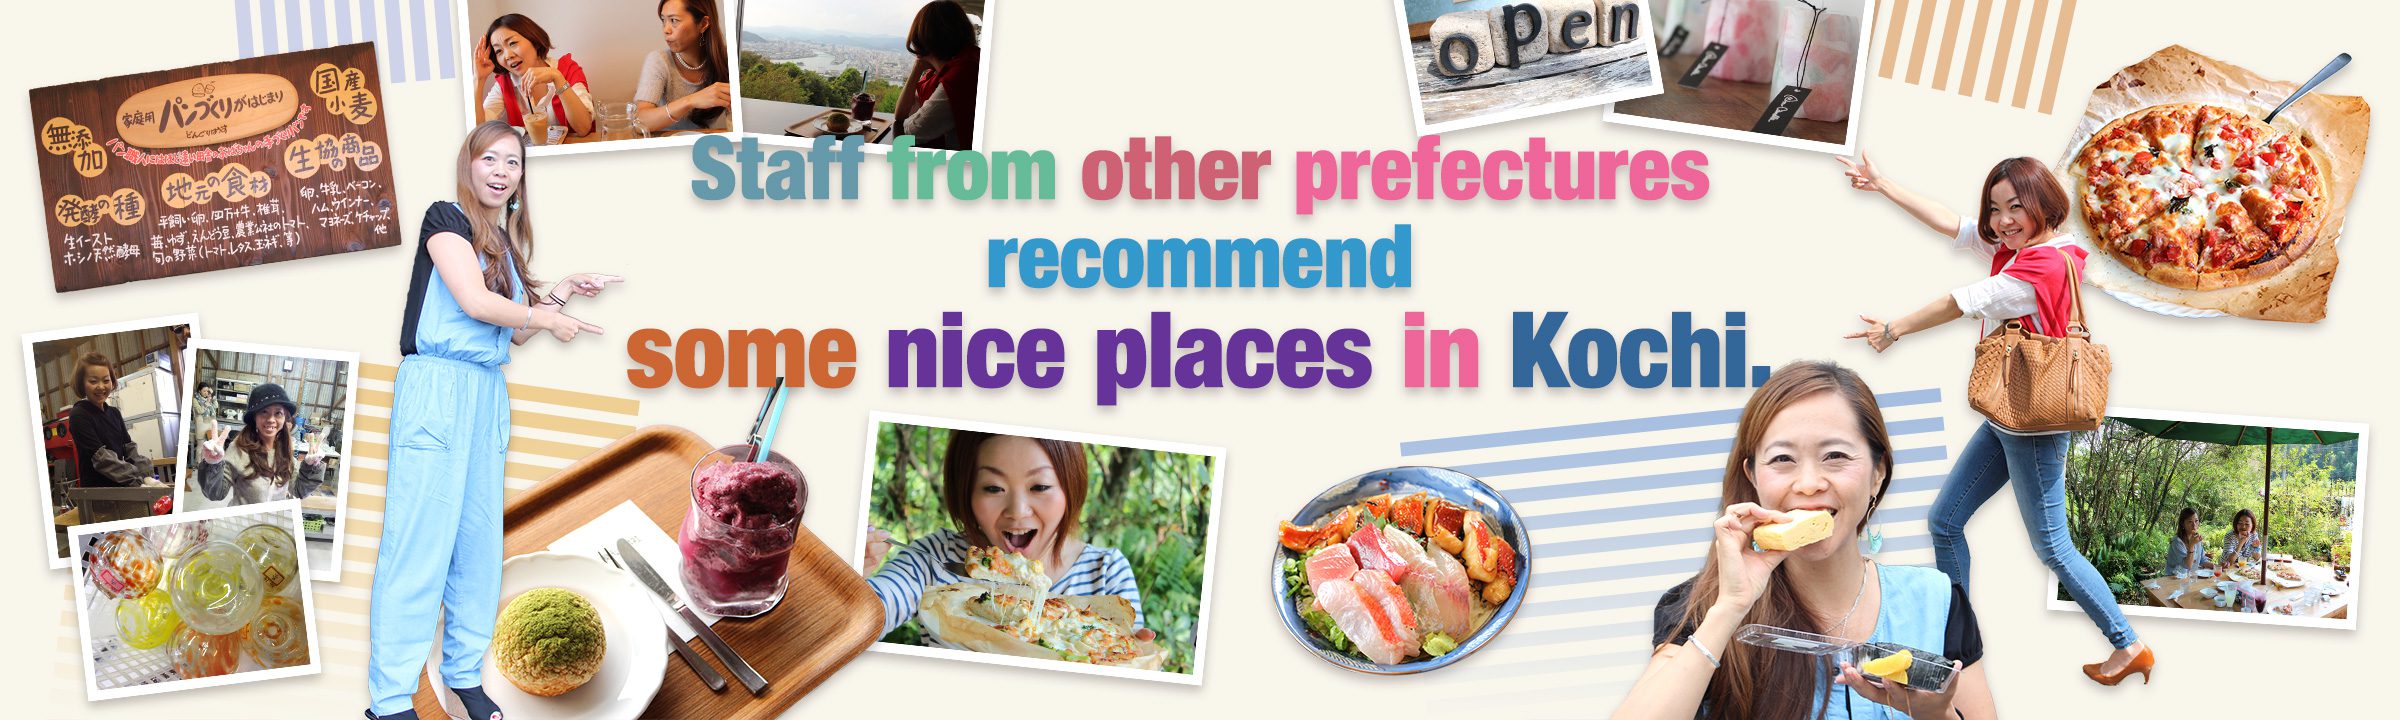 Staff from other prefectures recommend some nice places in Kochi.